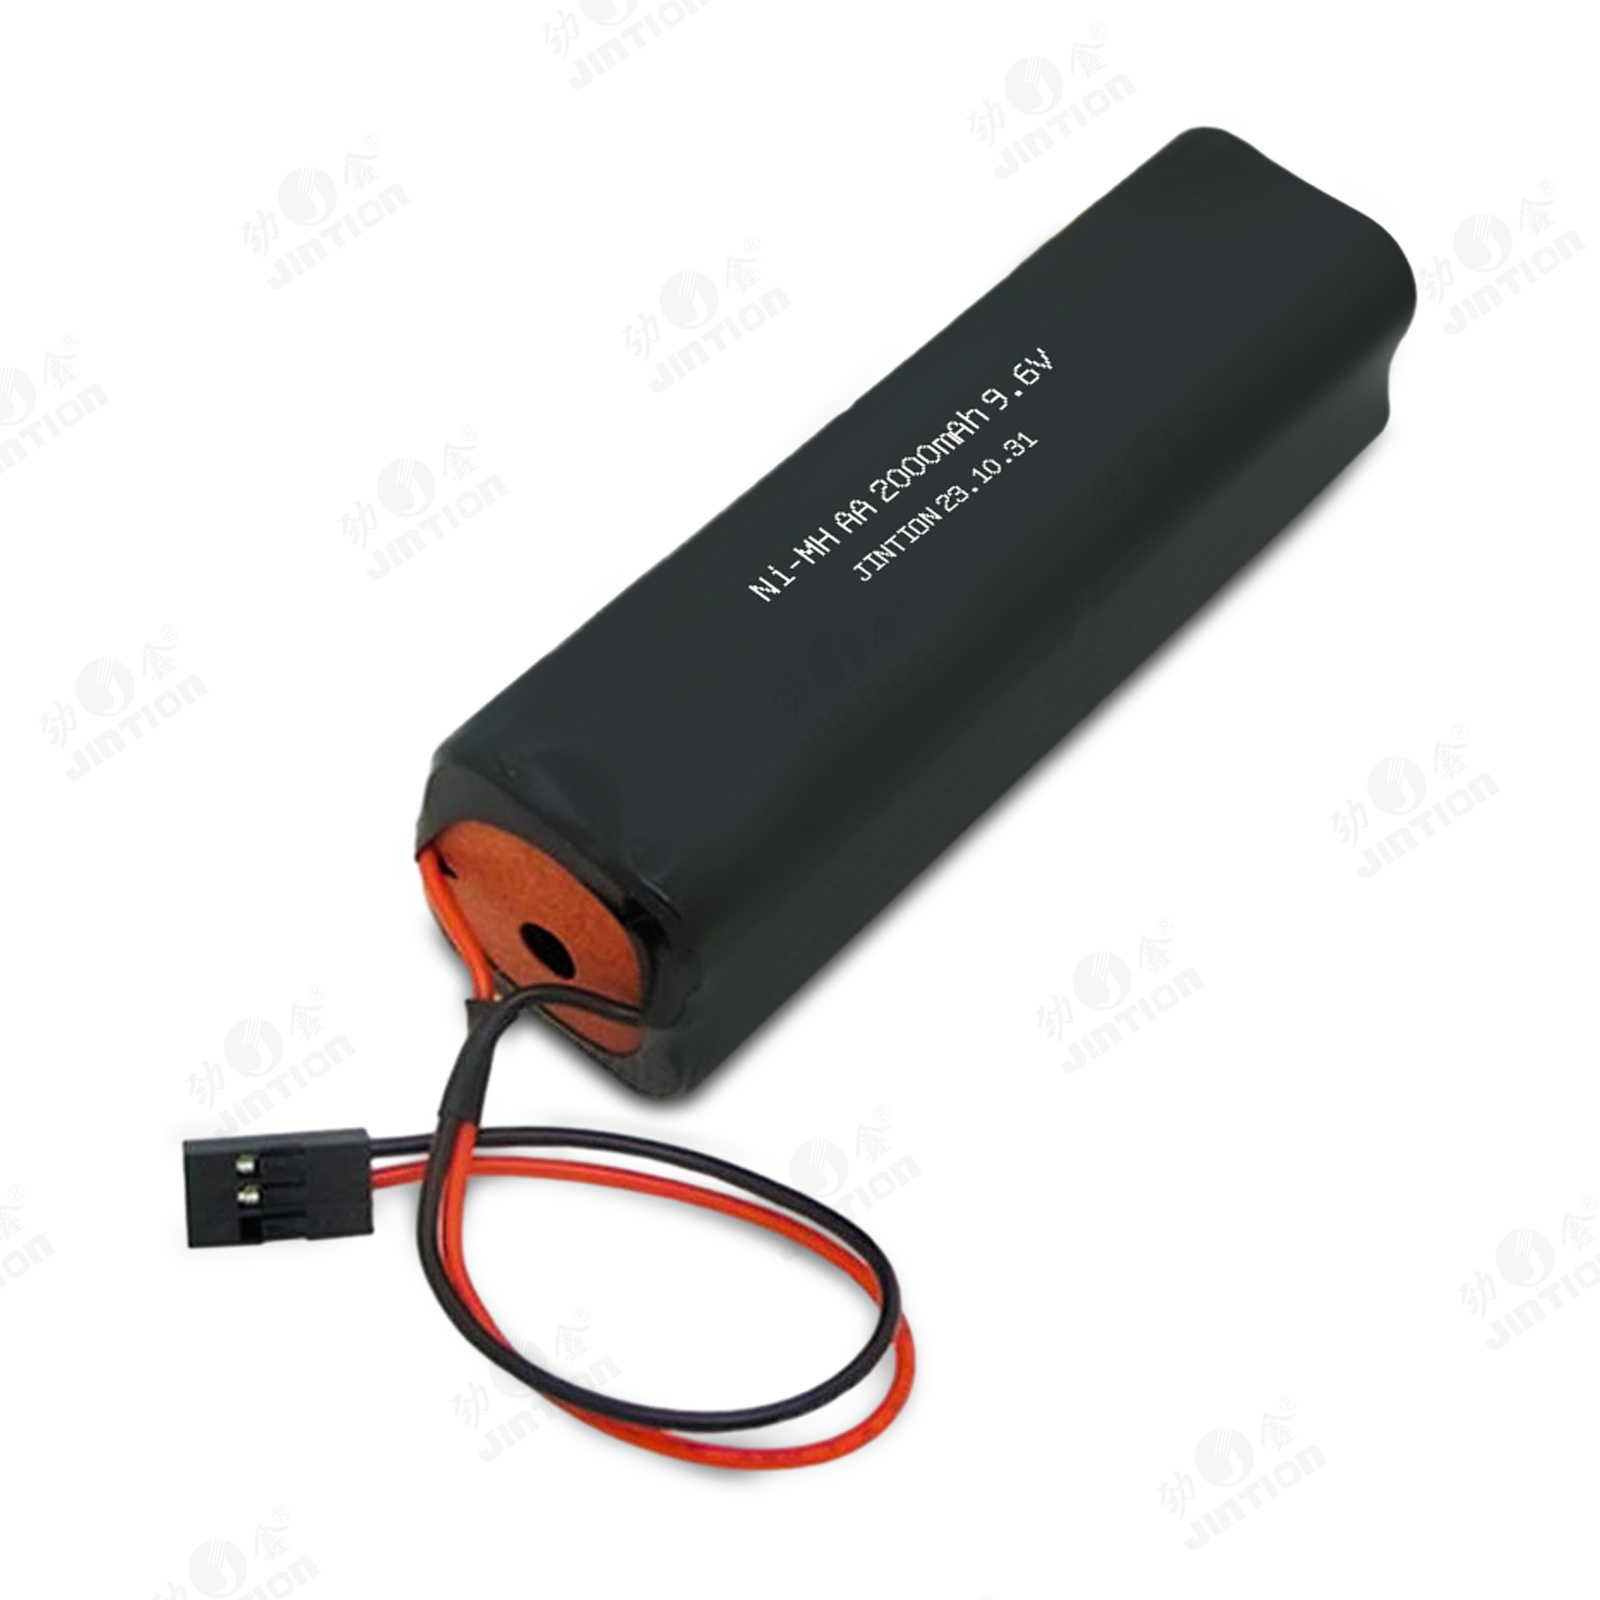 JINTION AA 2000mAh 9.6v nimh battery aa with Hitec Connector Square Futaba NT8S600B for RC Cars Airplanes Heli Sailplanes